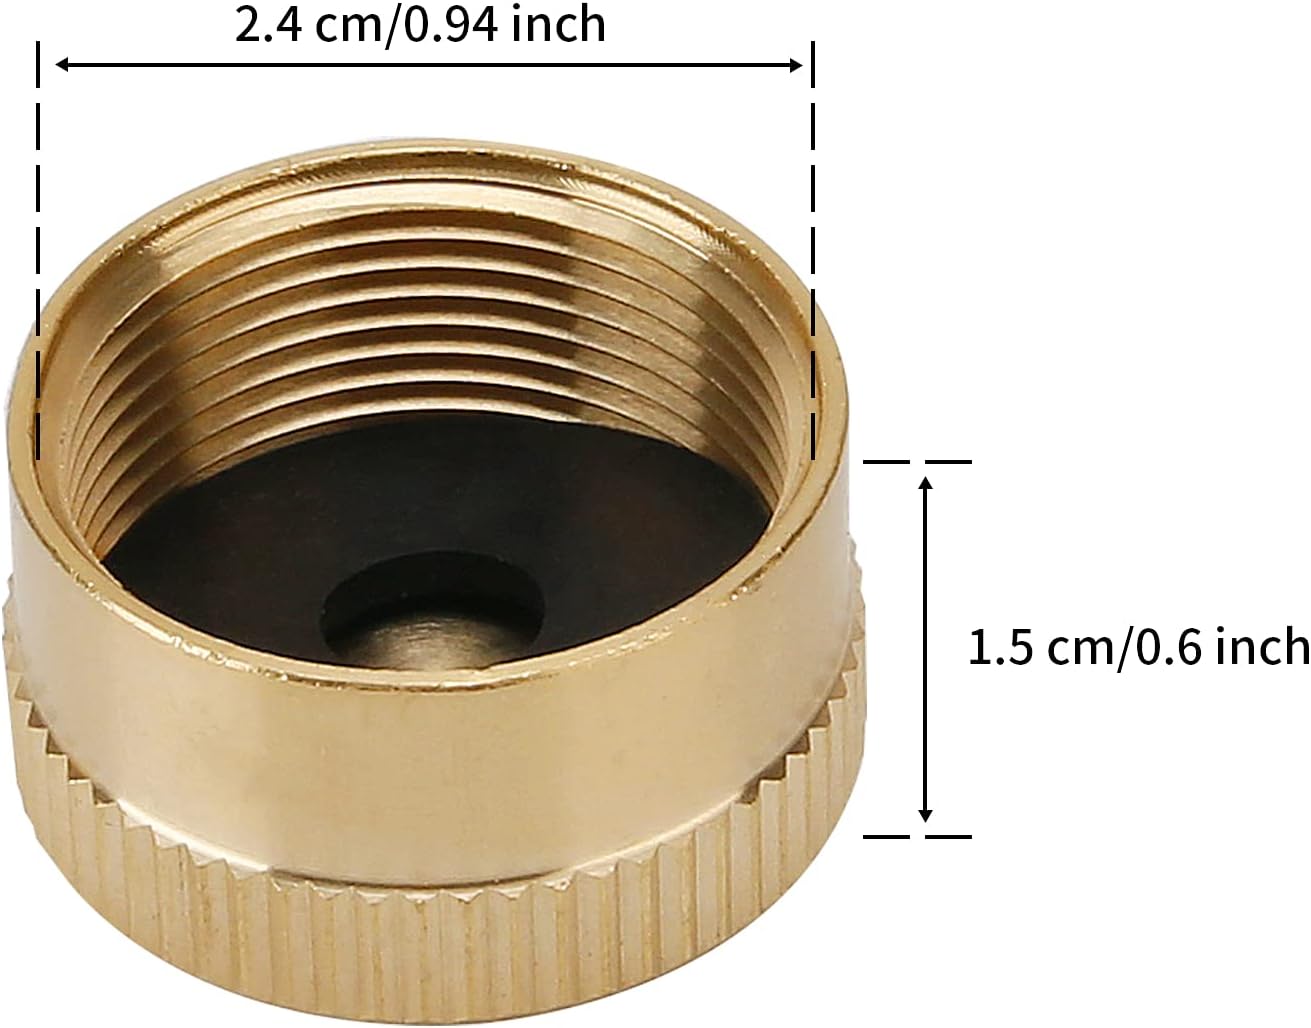 An image of a Solid Brass Refill 1lb Propane Tank Cap with Seal for a garden hose.